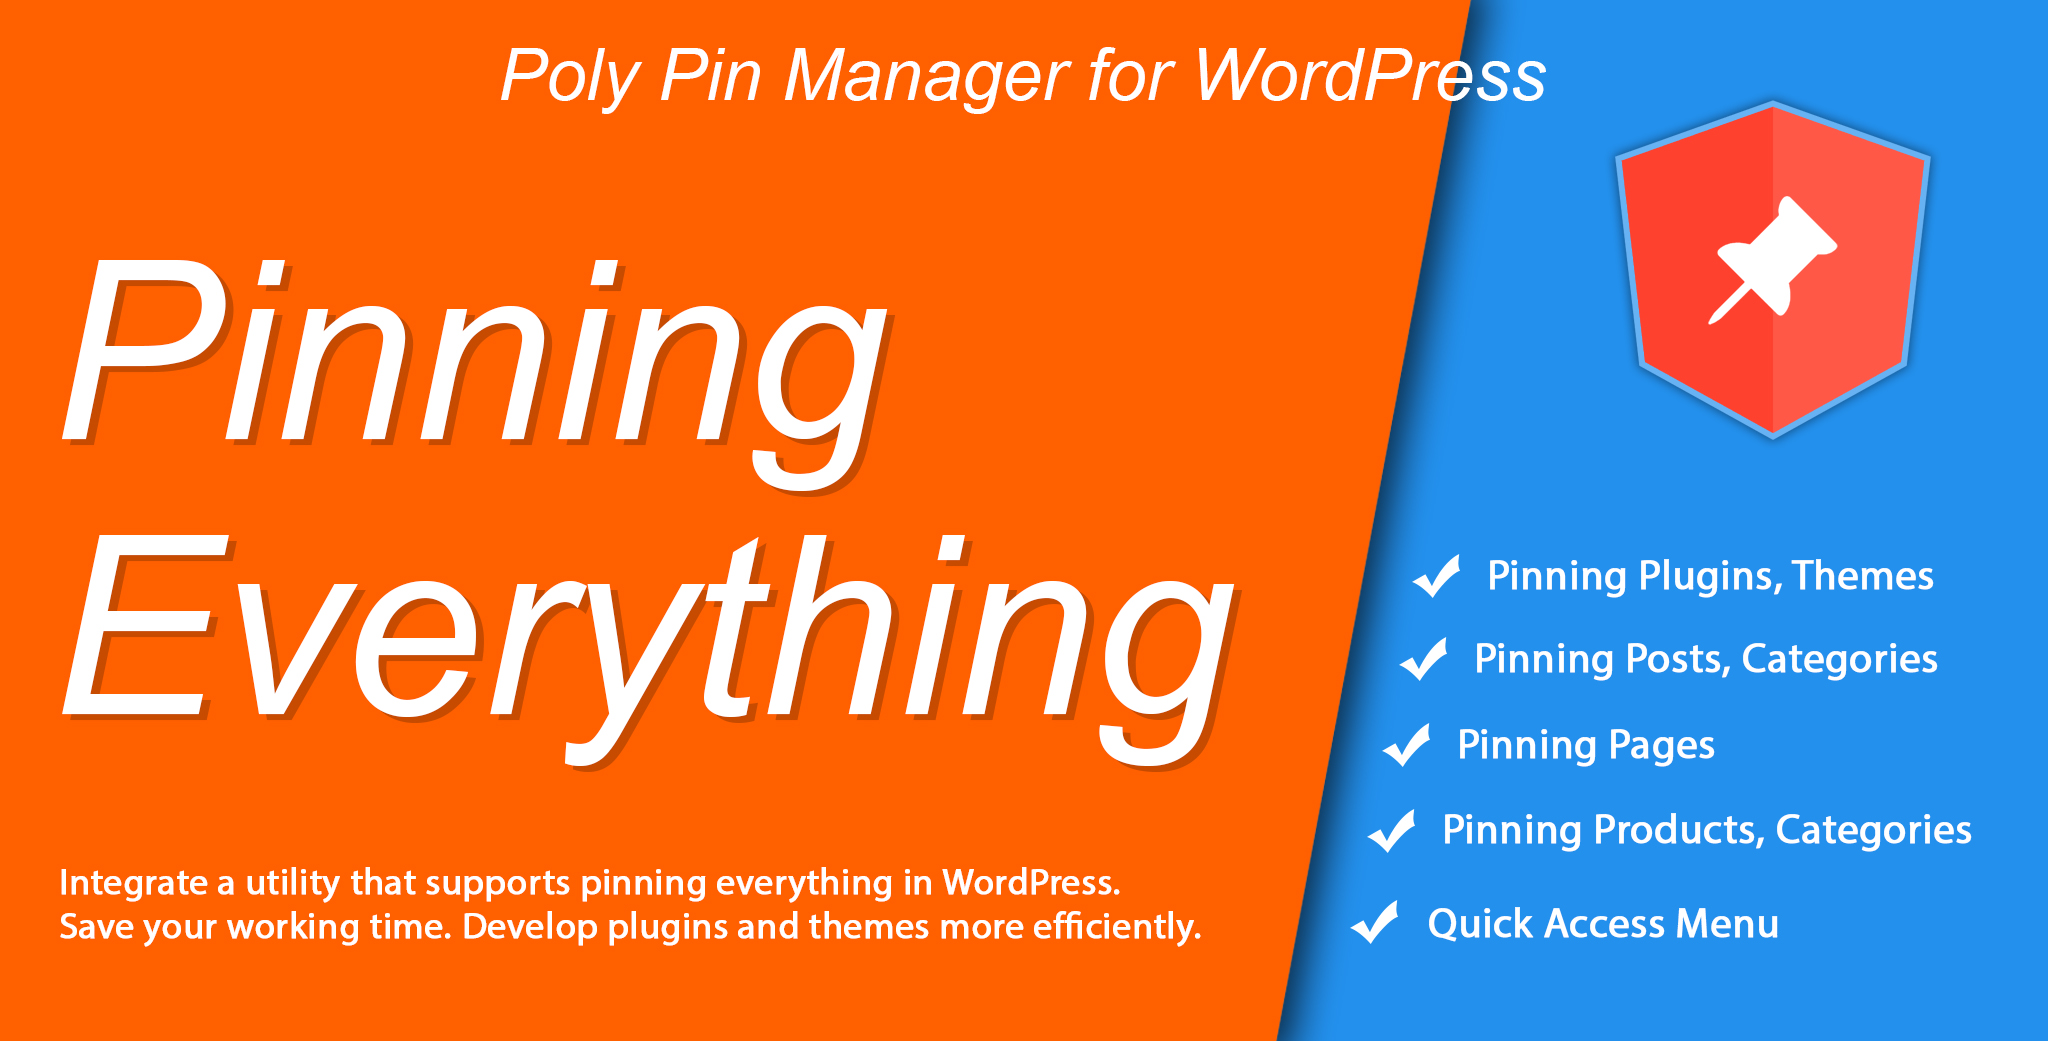 Poly Pin Manager for WordPress